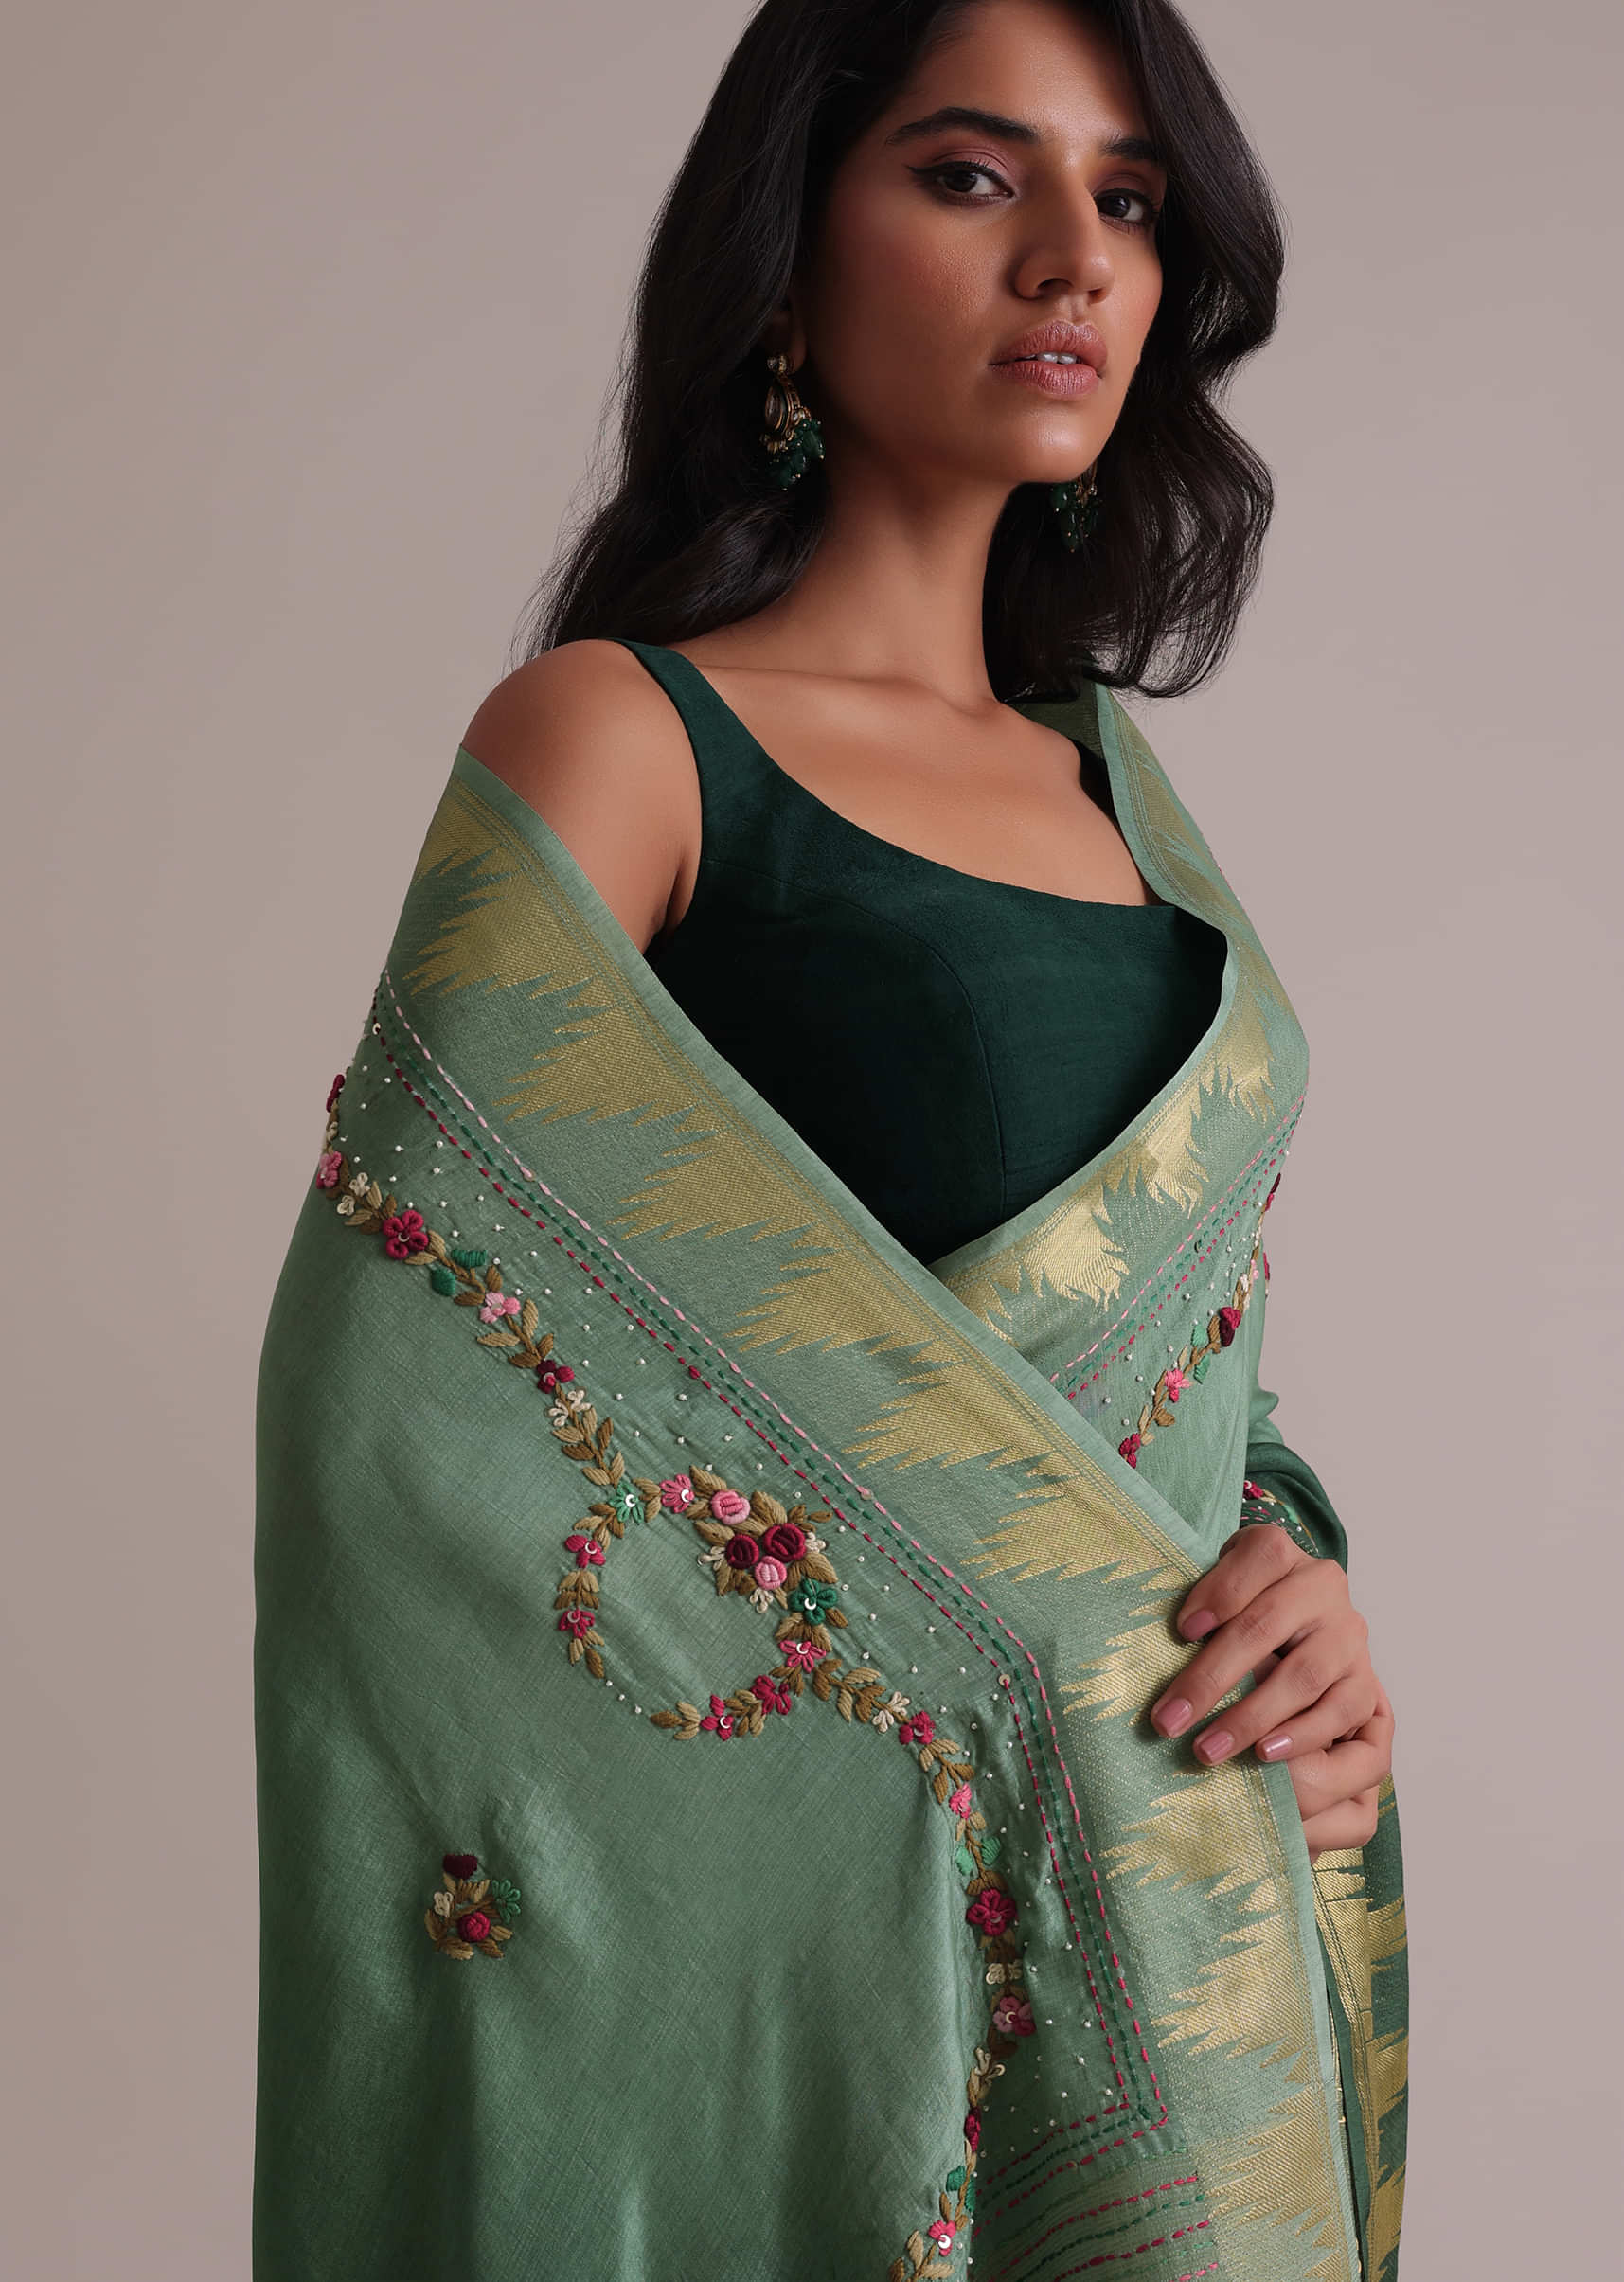 Dual-Tone Green Ombre Saree In Dola Crepe With Resham 3D Bud Embroidery